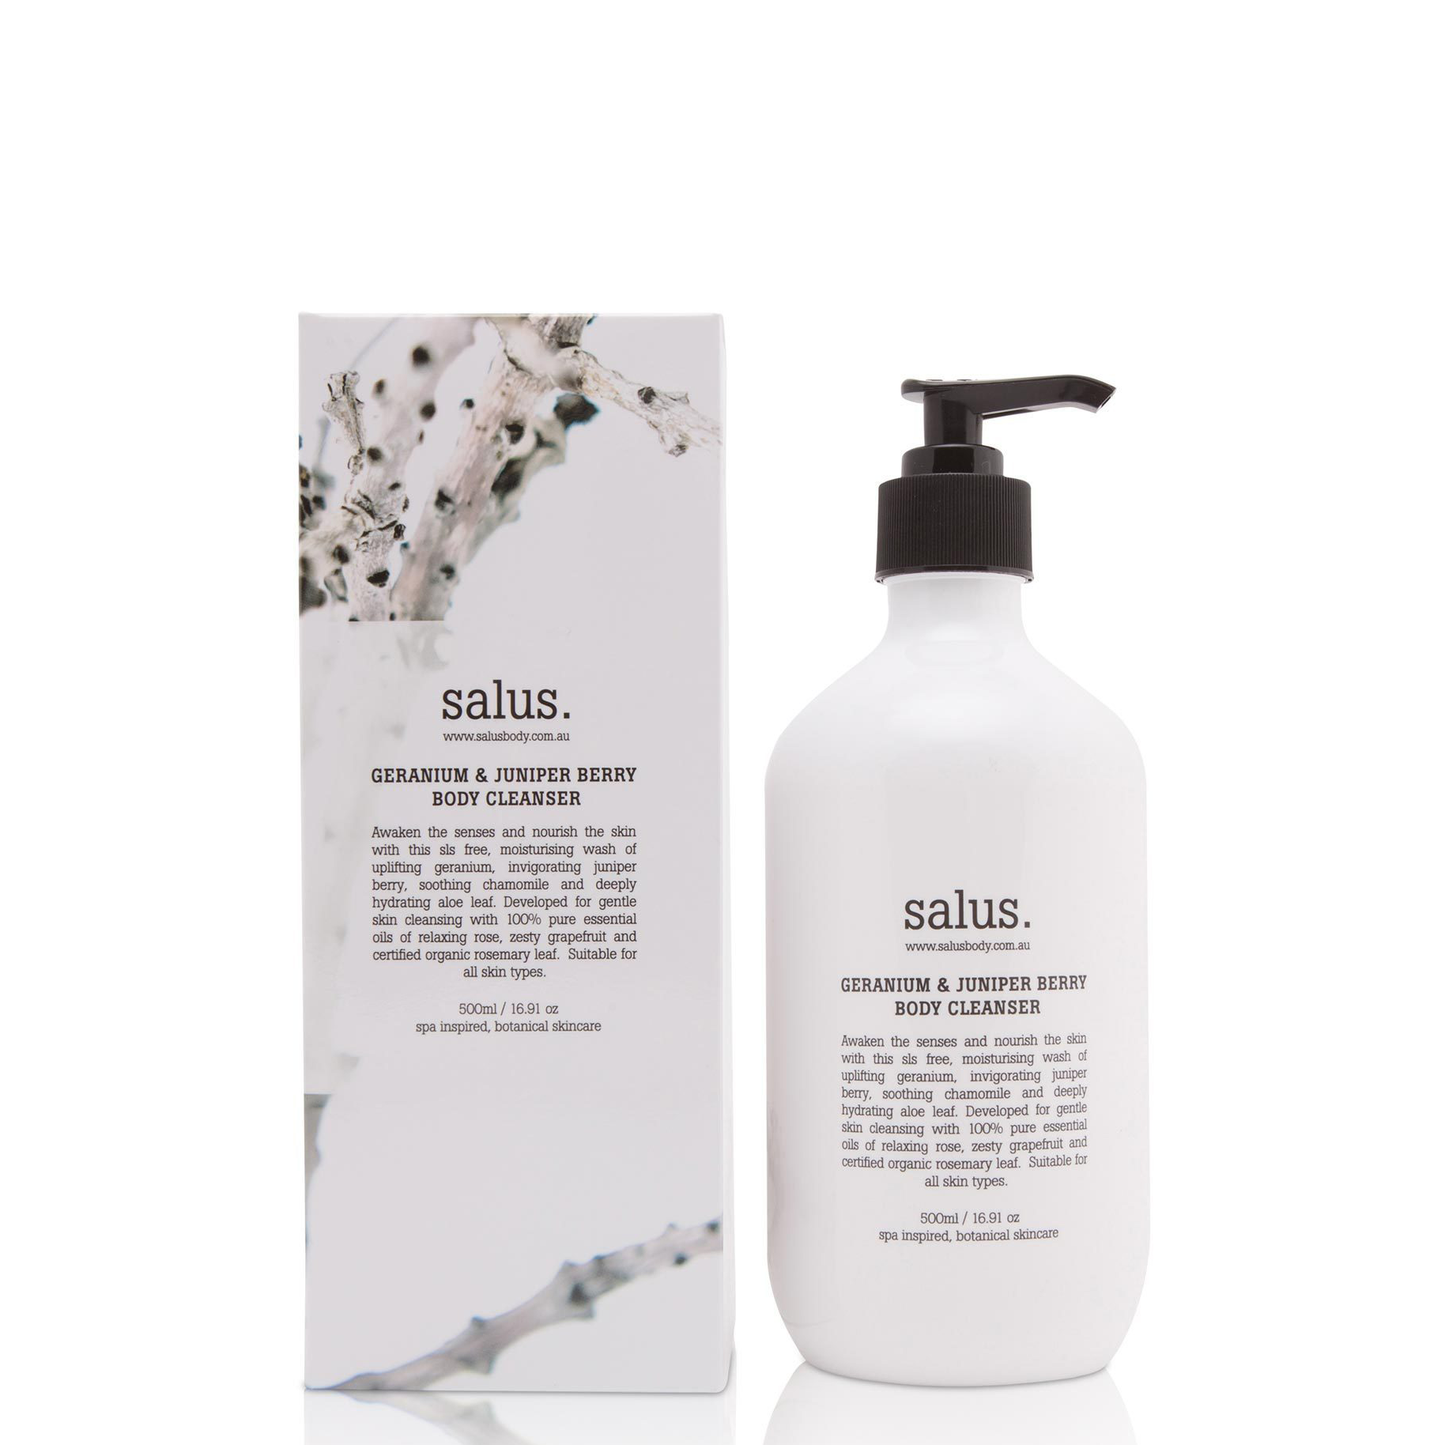 Geranium & Juniper Berry Body Cleanser (500ml) A soothing and replenishing SLS free body wash formulated with hydrating aloe, cleansing chamomile, certified organic rosemary leaf extract and a rejuvenating blend of geranium, juniper berry, grapefruit and rose essential oils.